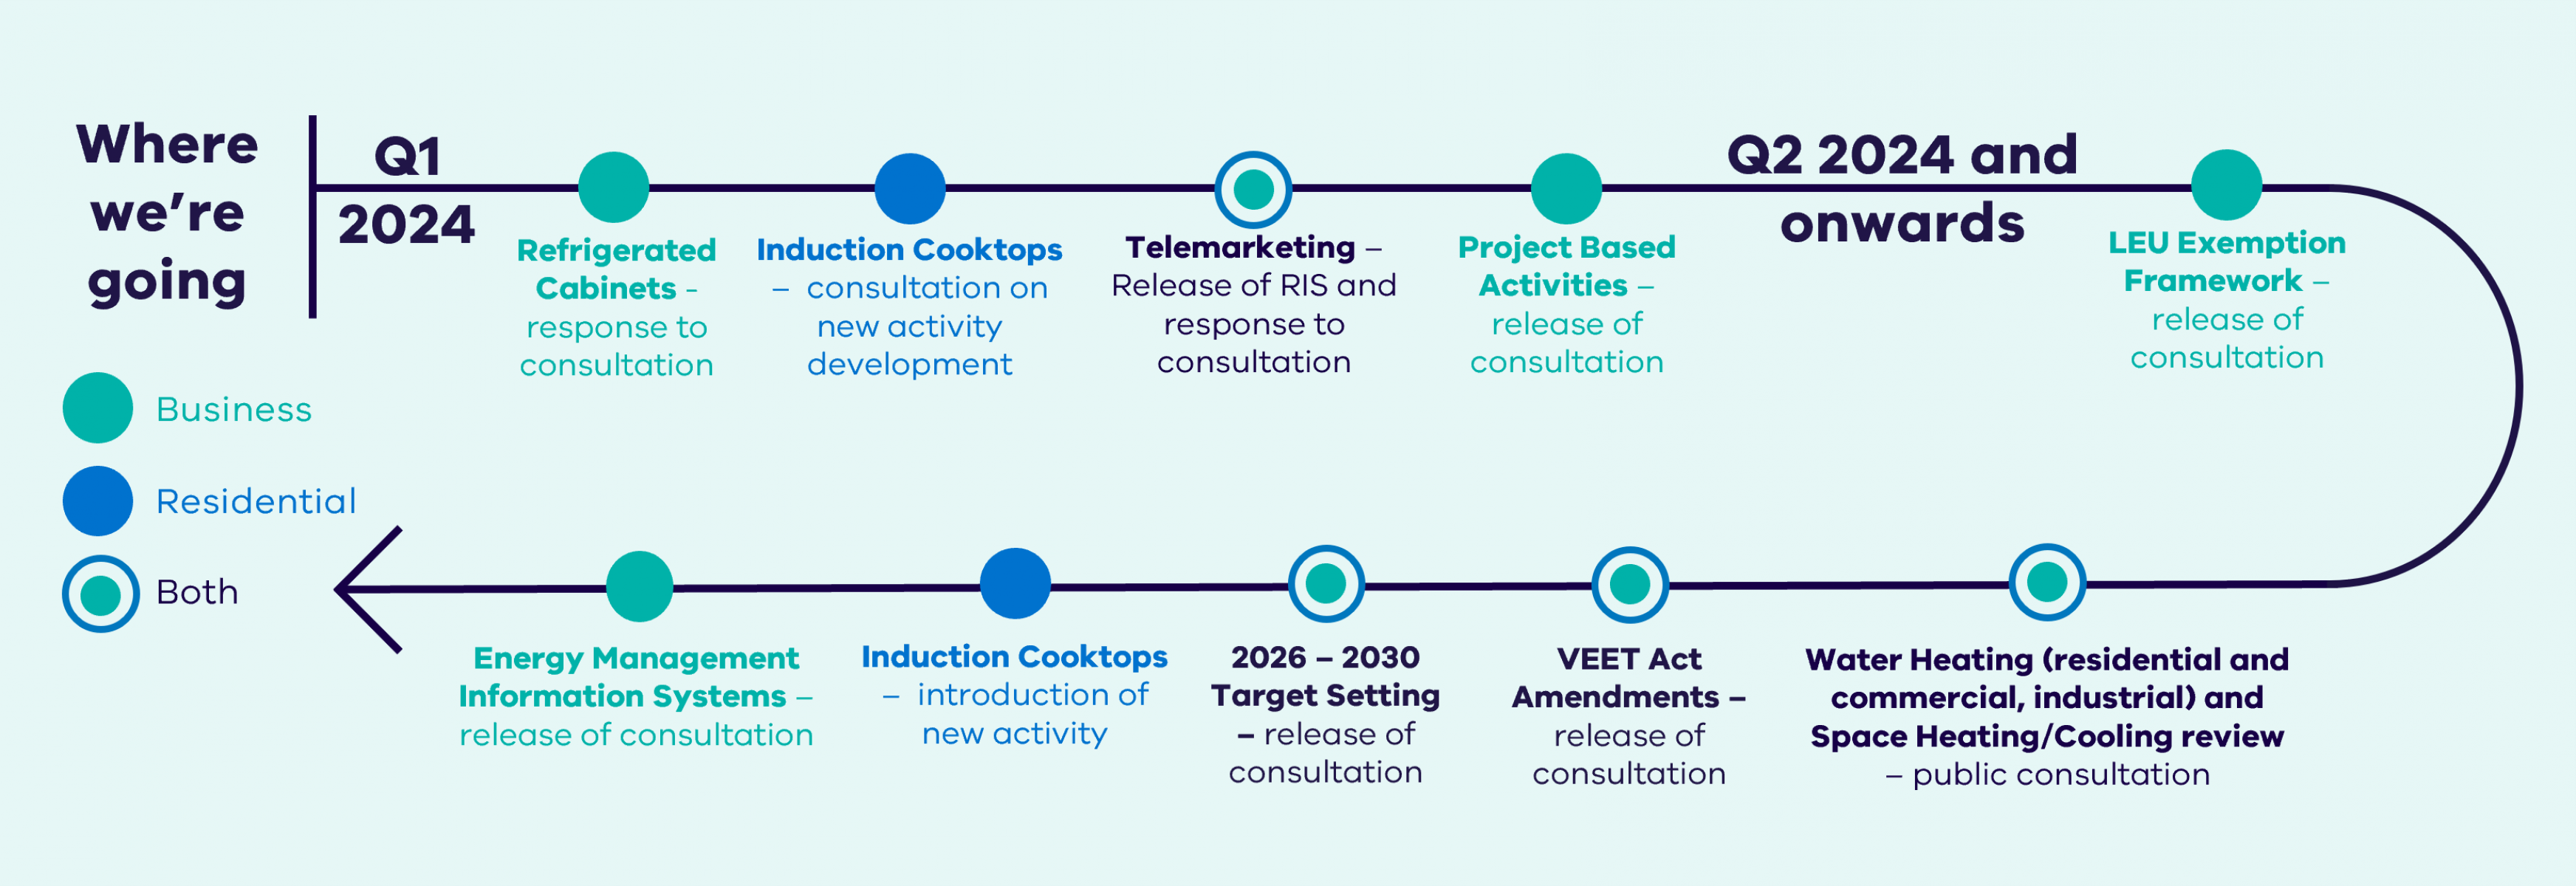 A graphic depicting the VEU's work for Q1 and Q2 2024